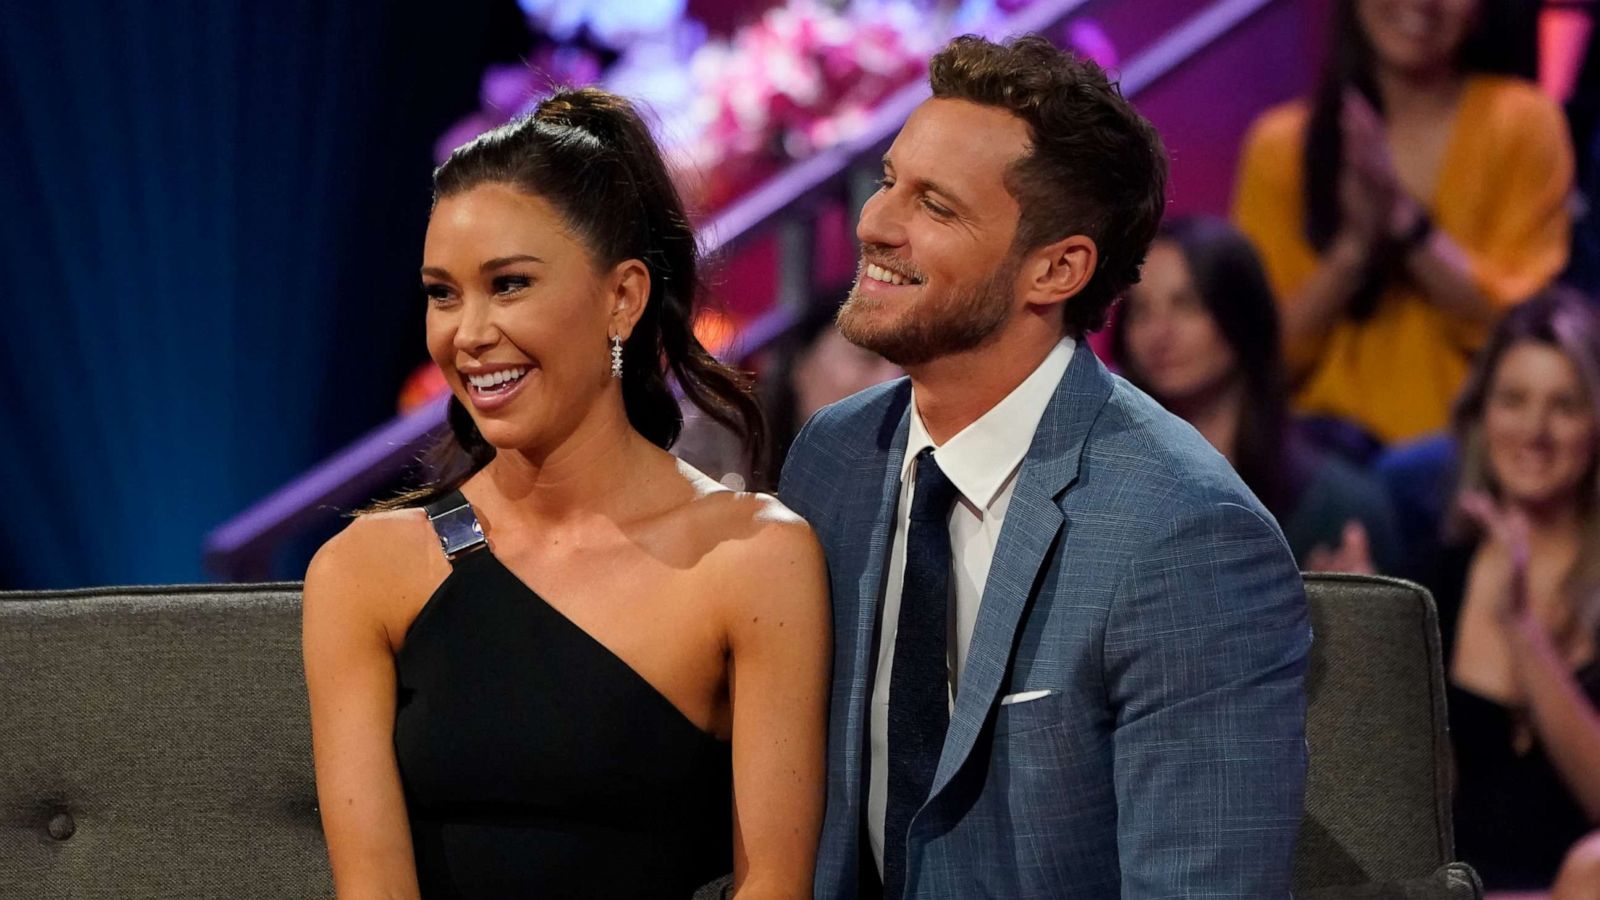 Former 'Bachelorette' Gabby Windey shares she is dating a woman